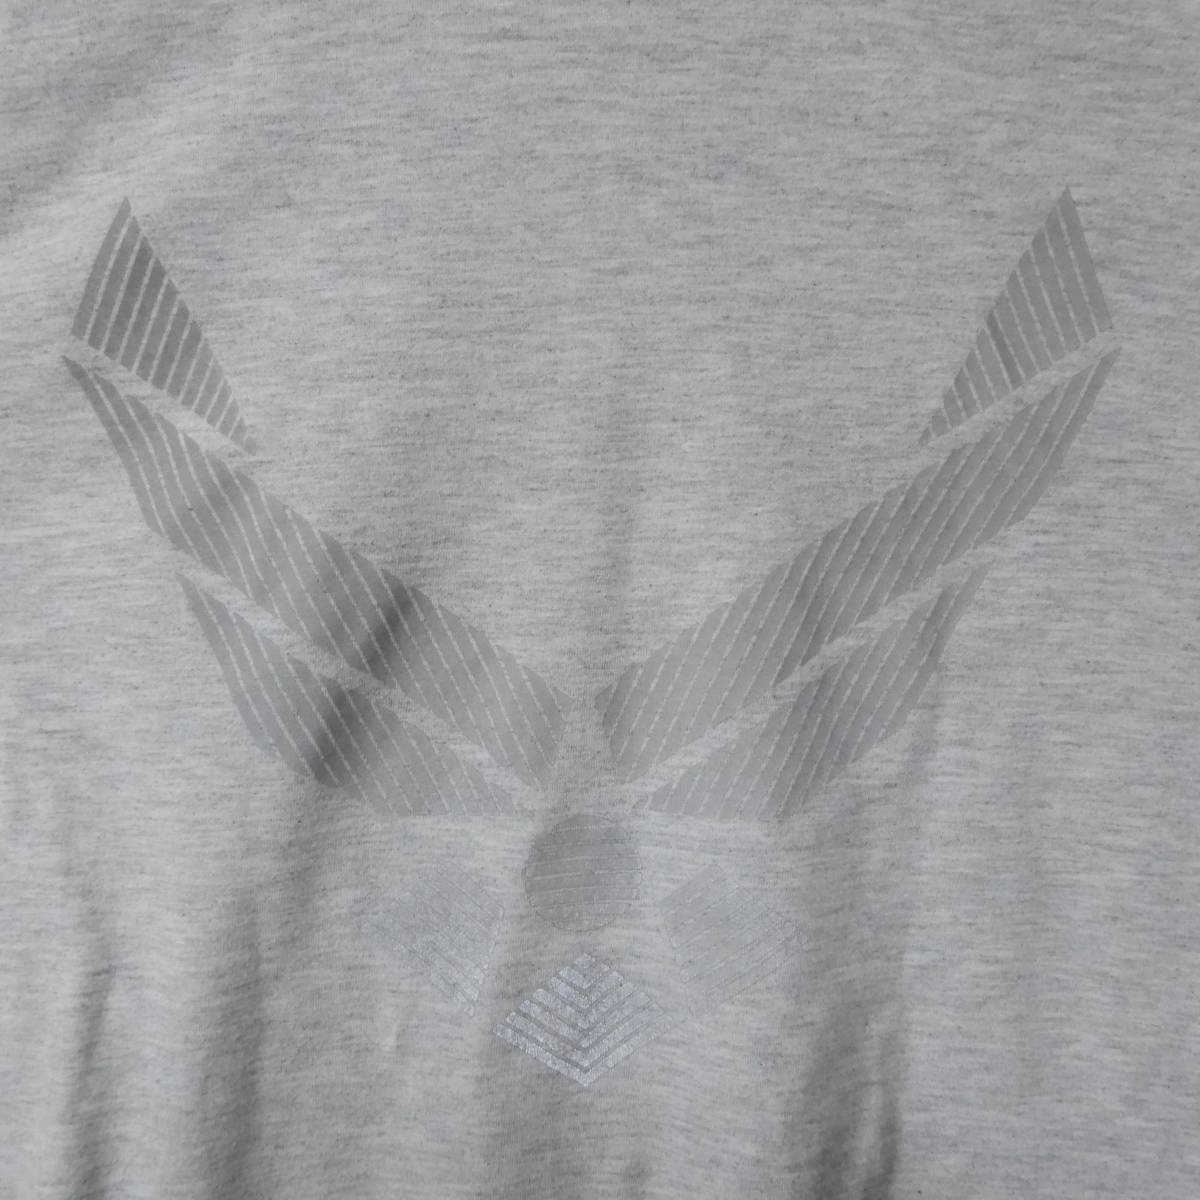 US AIR FORCE T-Shirts SMALL 2010s T119 アメリカ空軍 Tシャツ トレーニングシャツ フィットネスシャツ 2010年製 ミリタリー_画像4